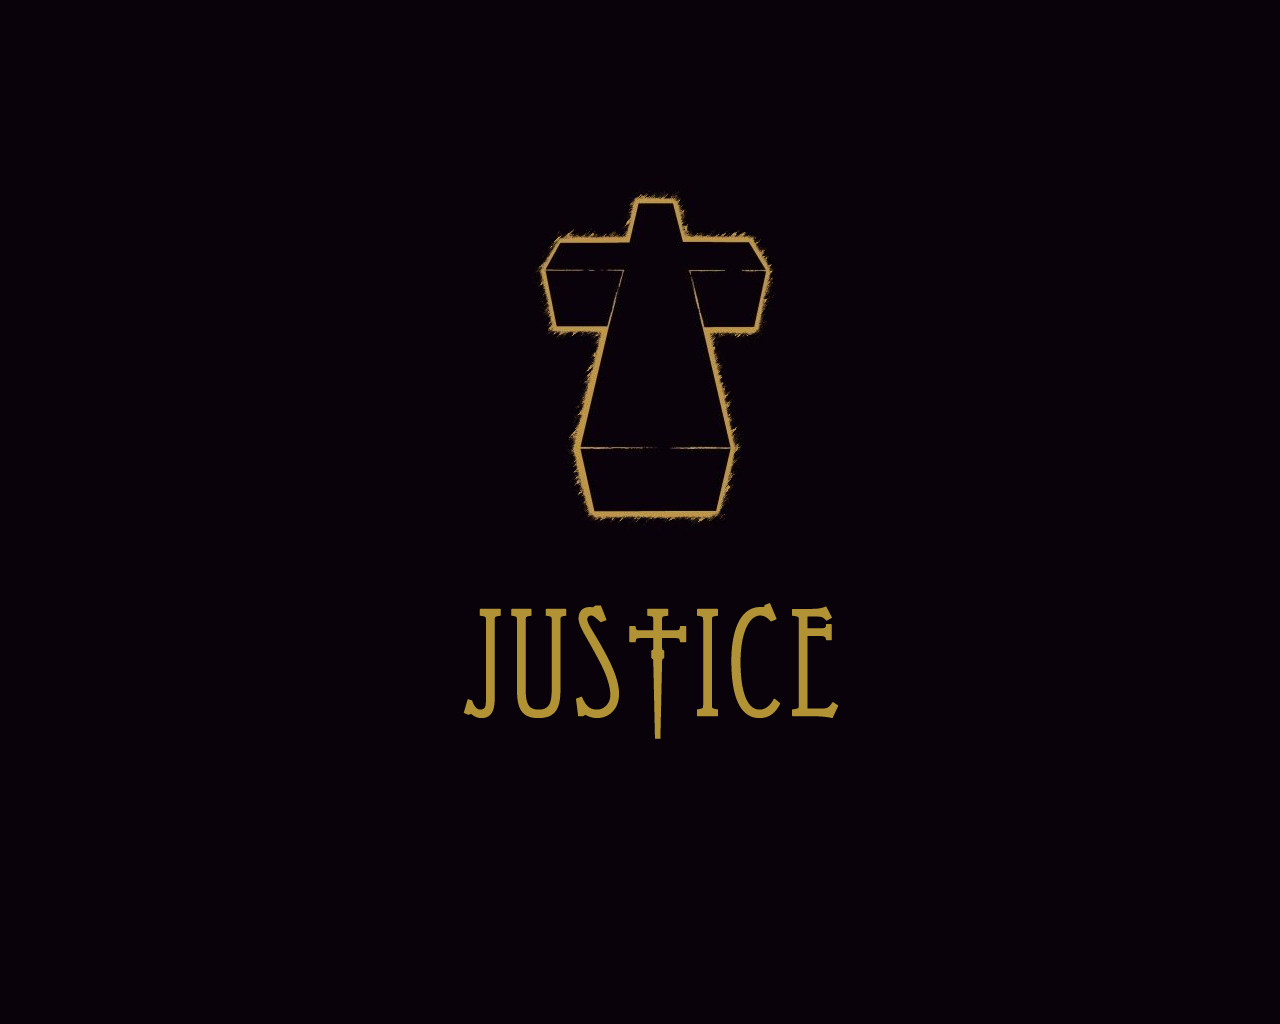 9 Justice HD Wallpapers | Backgrounds - Wallpaper Abyss